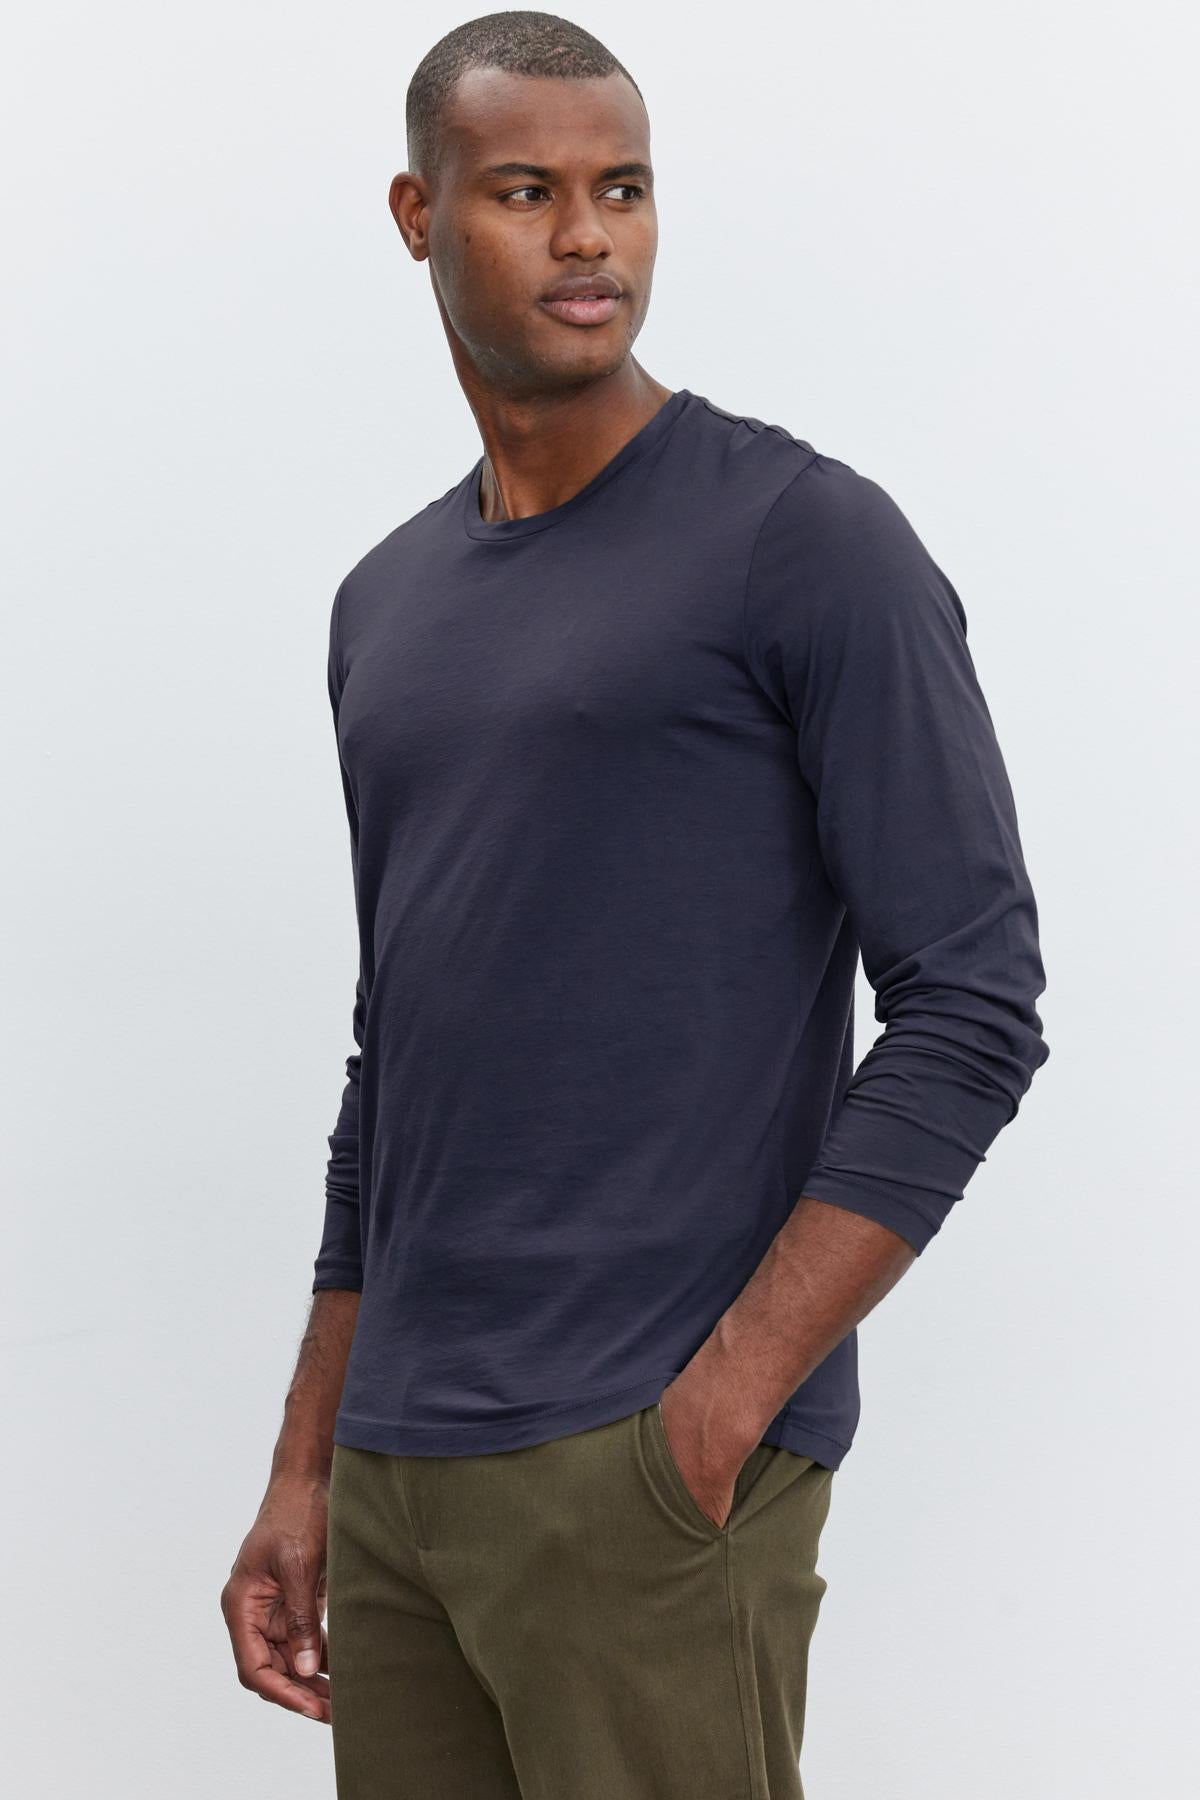   A man in a Velvet by Graham & Spencer Skeeter Whisper Classic Crew Neck Tee and olive pants stands against a plain background, looking to the side. 